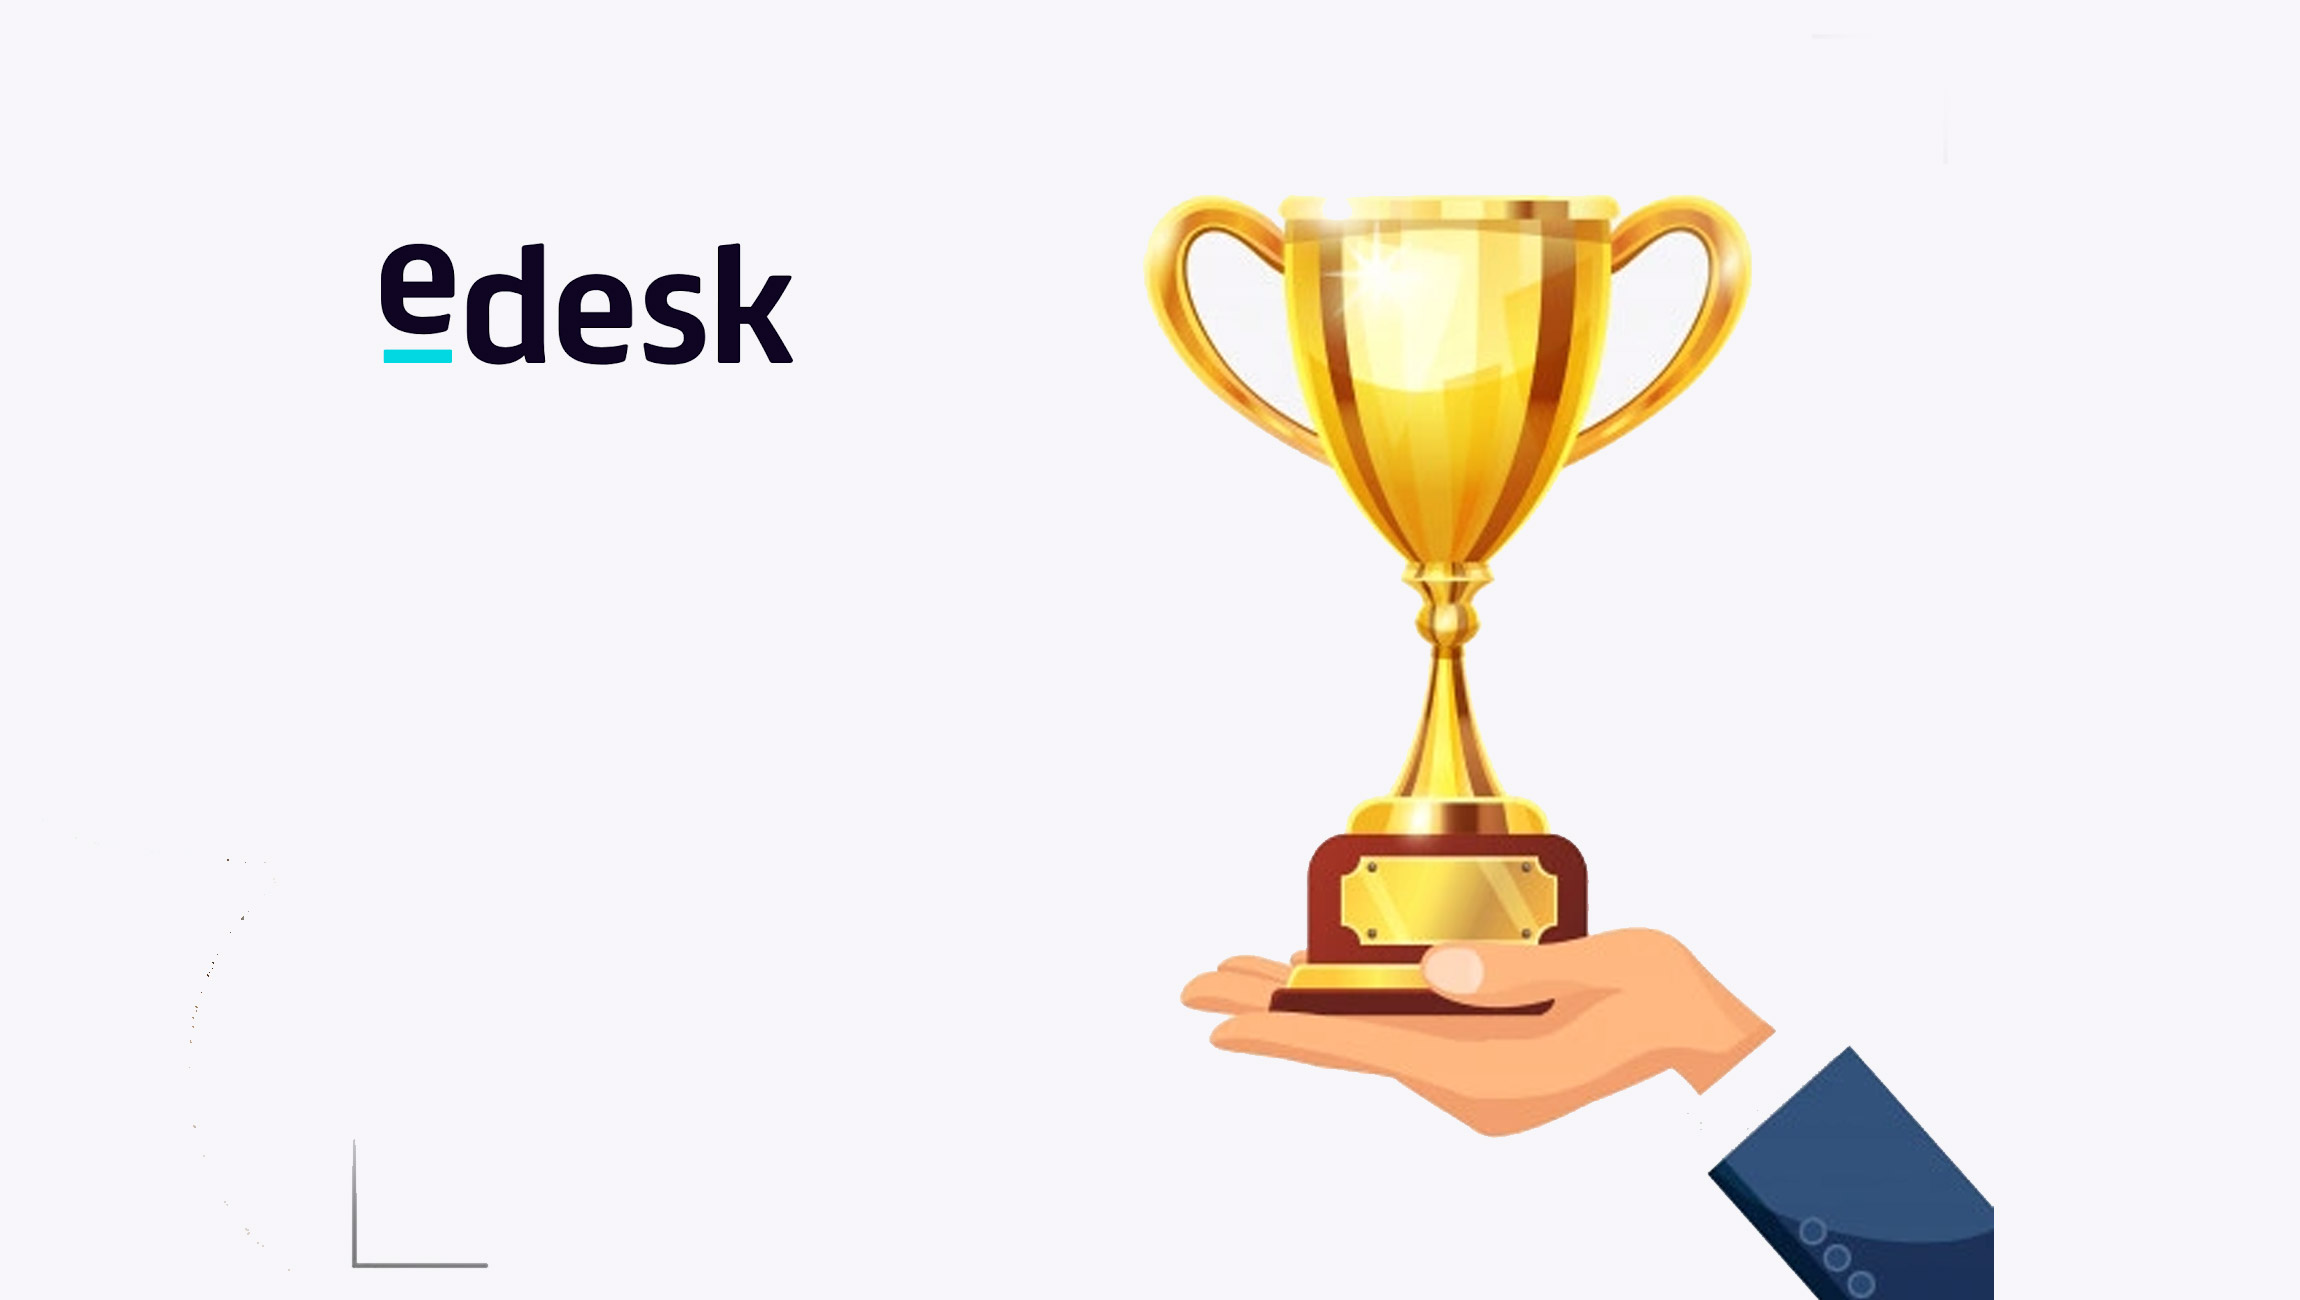 eDesk-Awarded-‘Innovative-New-Technology’-for-eDesk-Smart-Inbox-in-Deloitte-Ireland-Technology-Fast-50-Awards-2021-After-Investment-in-Artificial-Intelligence-Advancements